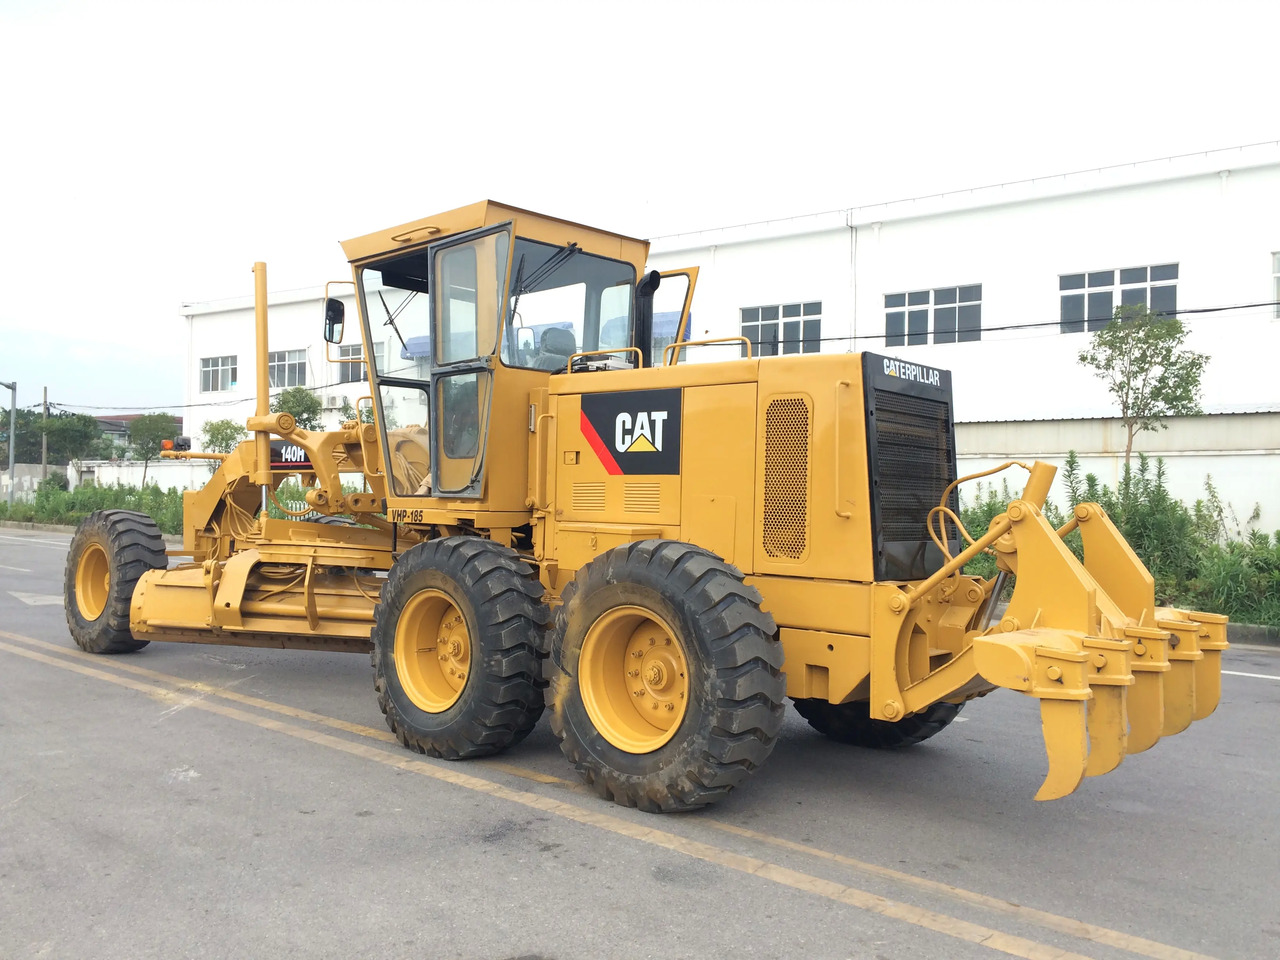 Niveleuse Hot sale Used Cat 140H motor grader with good condition,USED heavy equipment used motor grader CAT 140H grader in China: photos 4